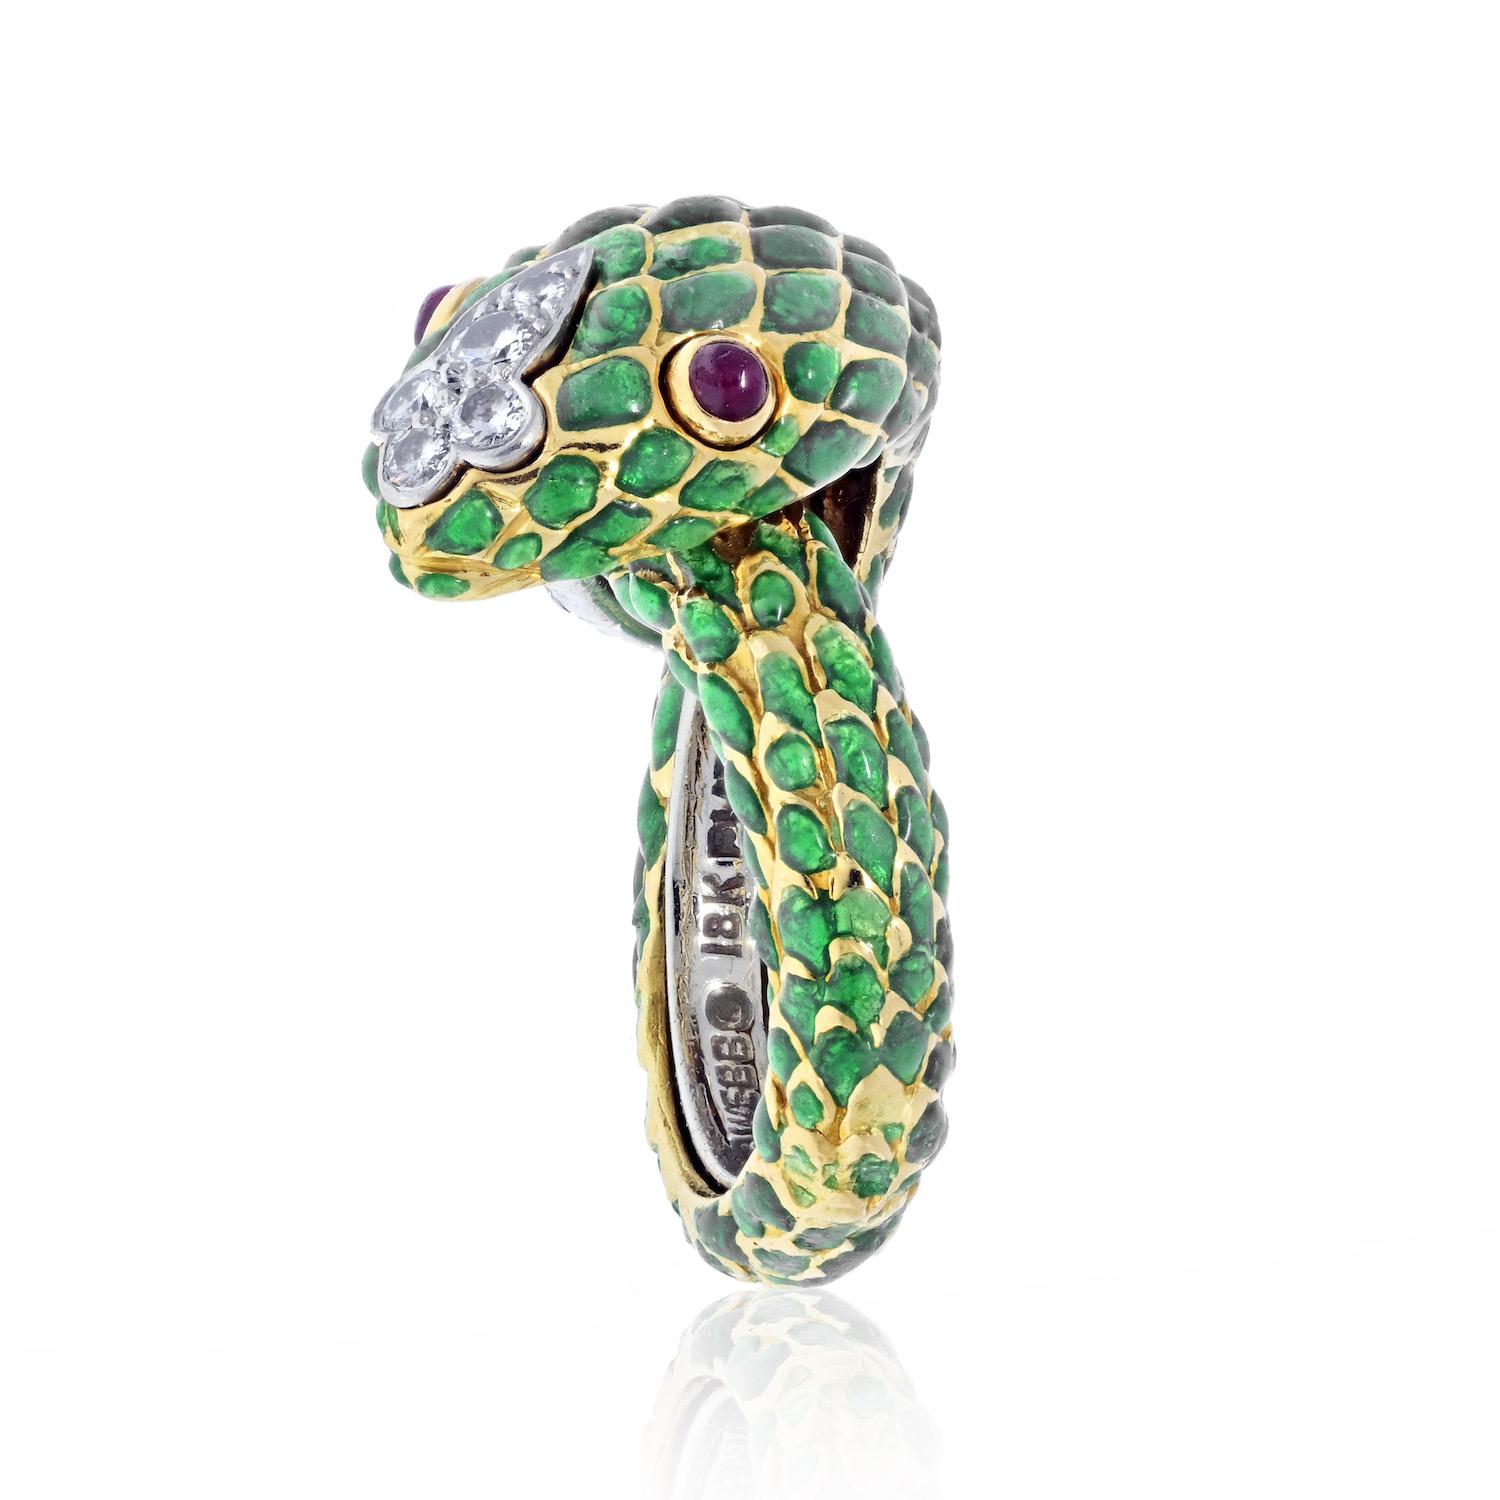 David Webb Platinum & 18K Yellow Gold Green Enamel Ruby Eyes Serpent Ring.
The coiled snake of green enamel and round brilliant-cut diamonds with cabochon ruby eyes
Platinum and 18k yellow gold.
Signed Webb.